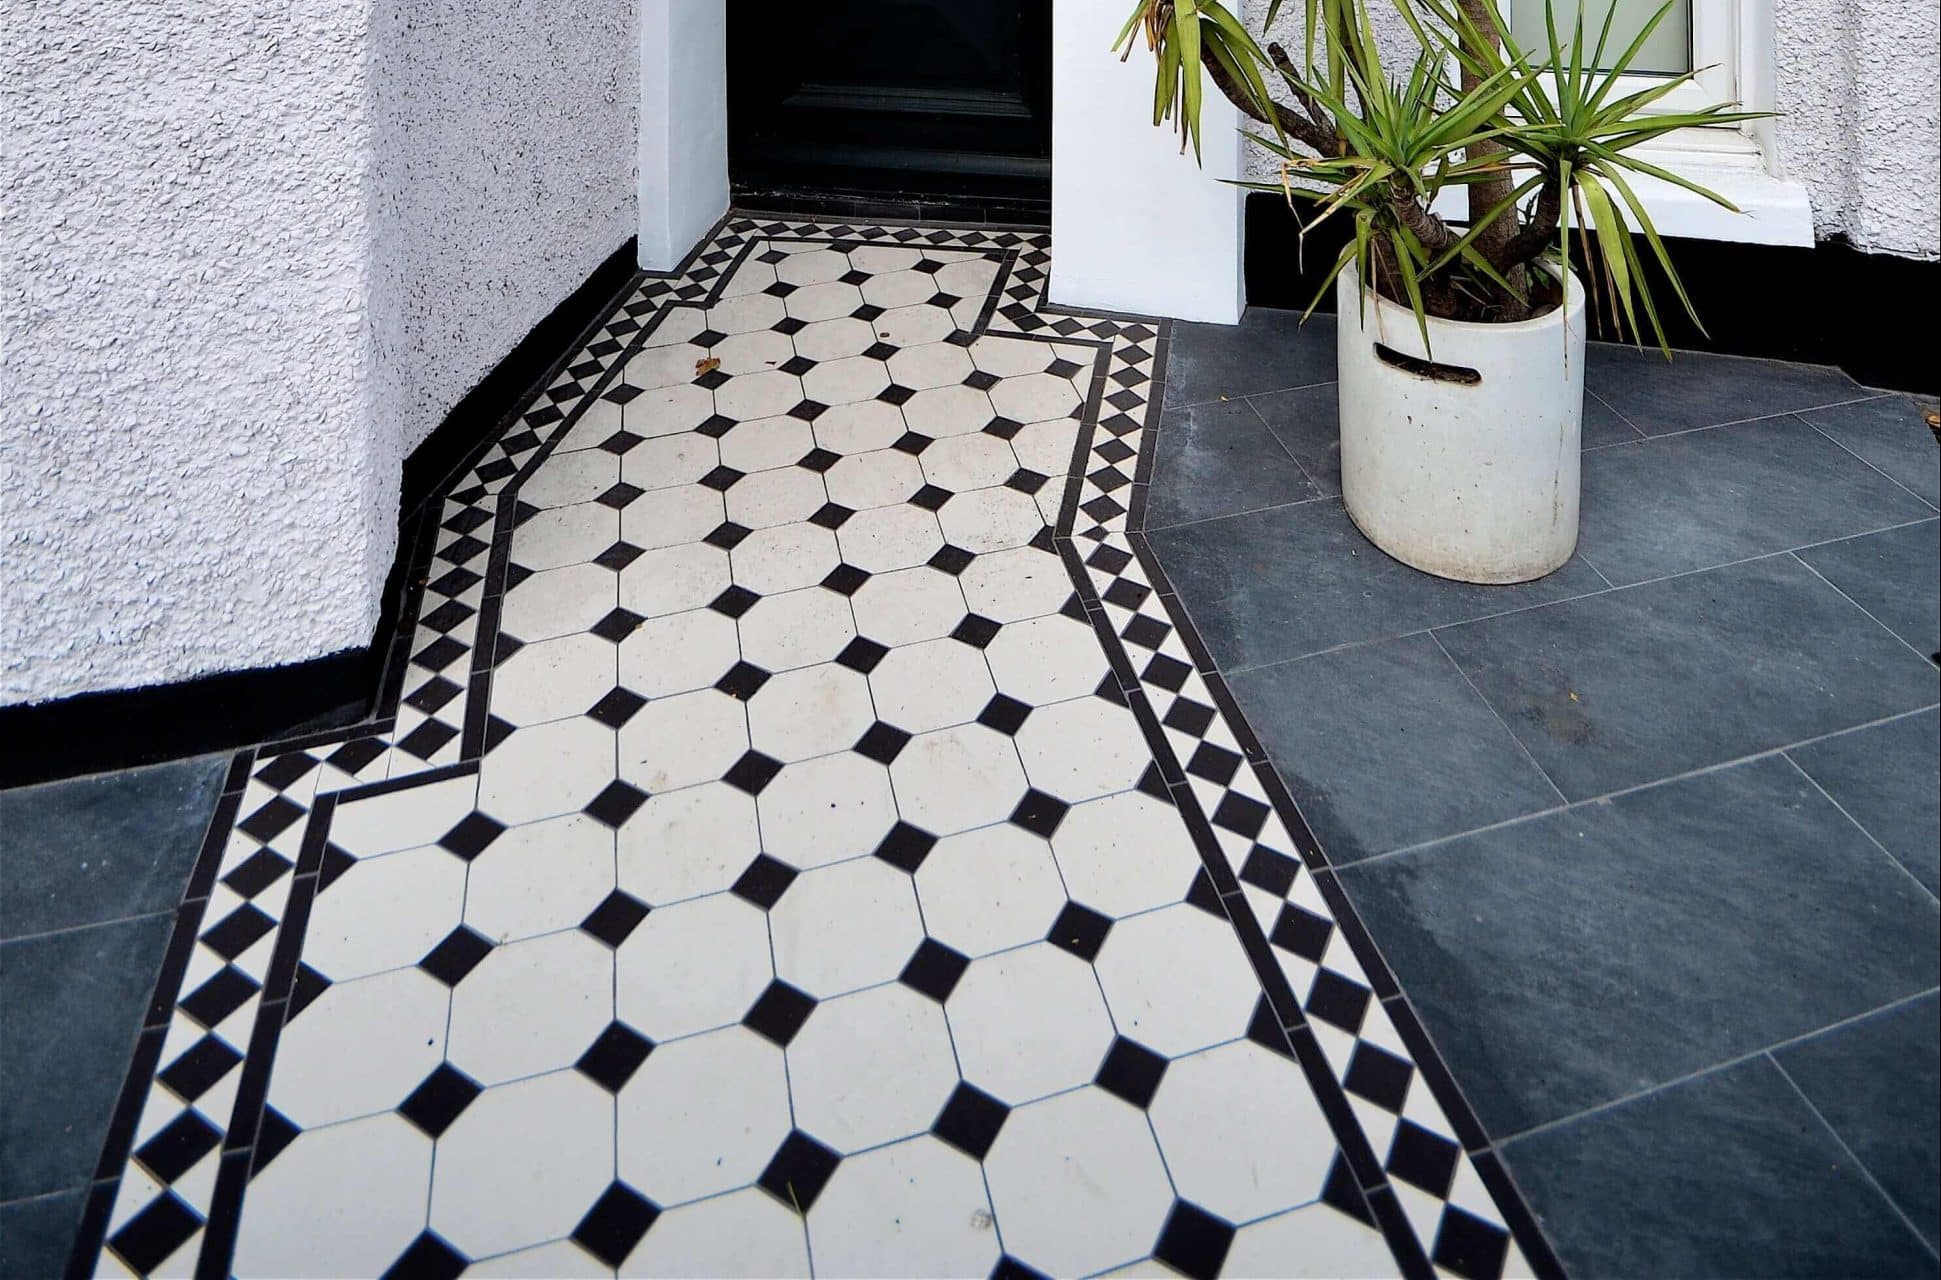  Victorian Pathway Tiling Plumstead SE18